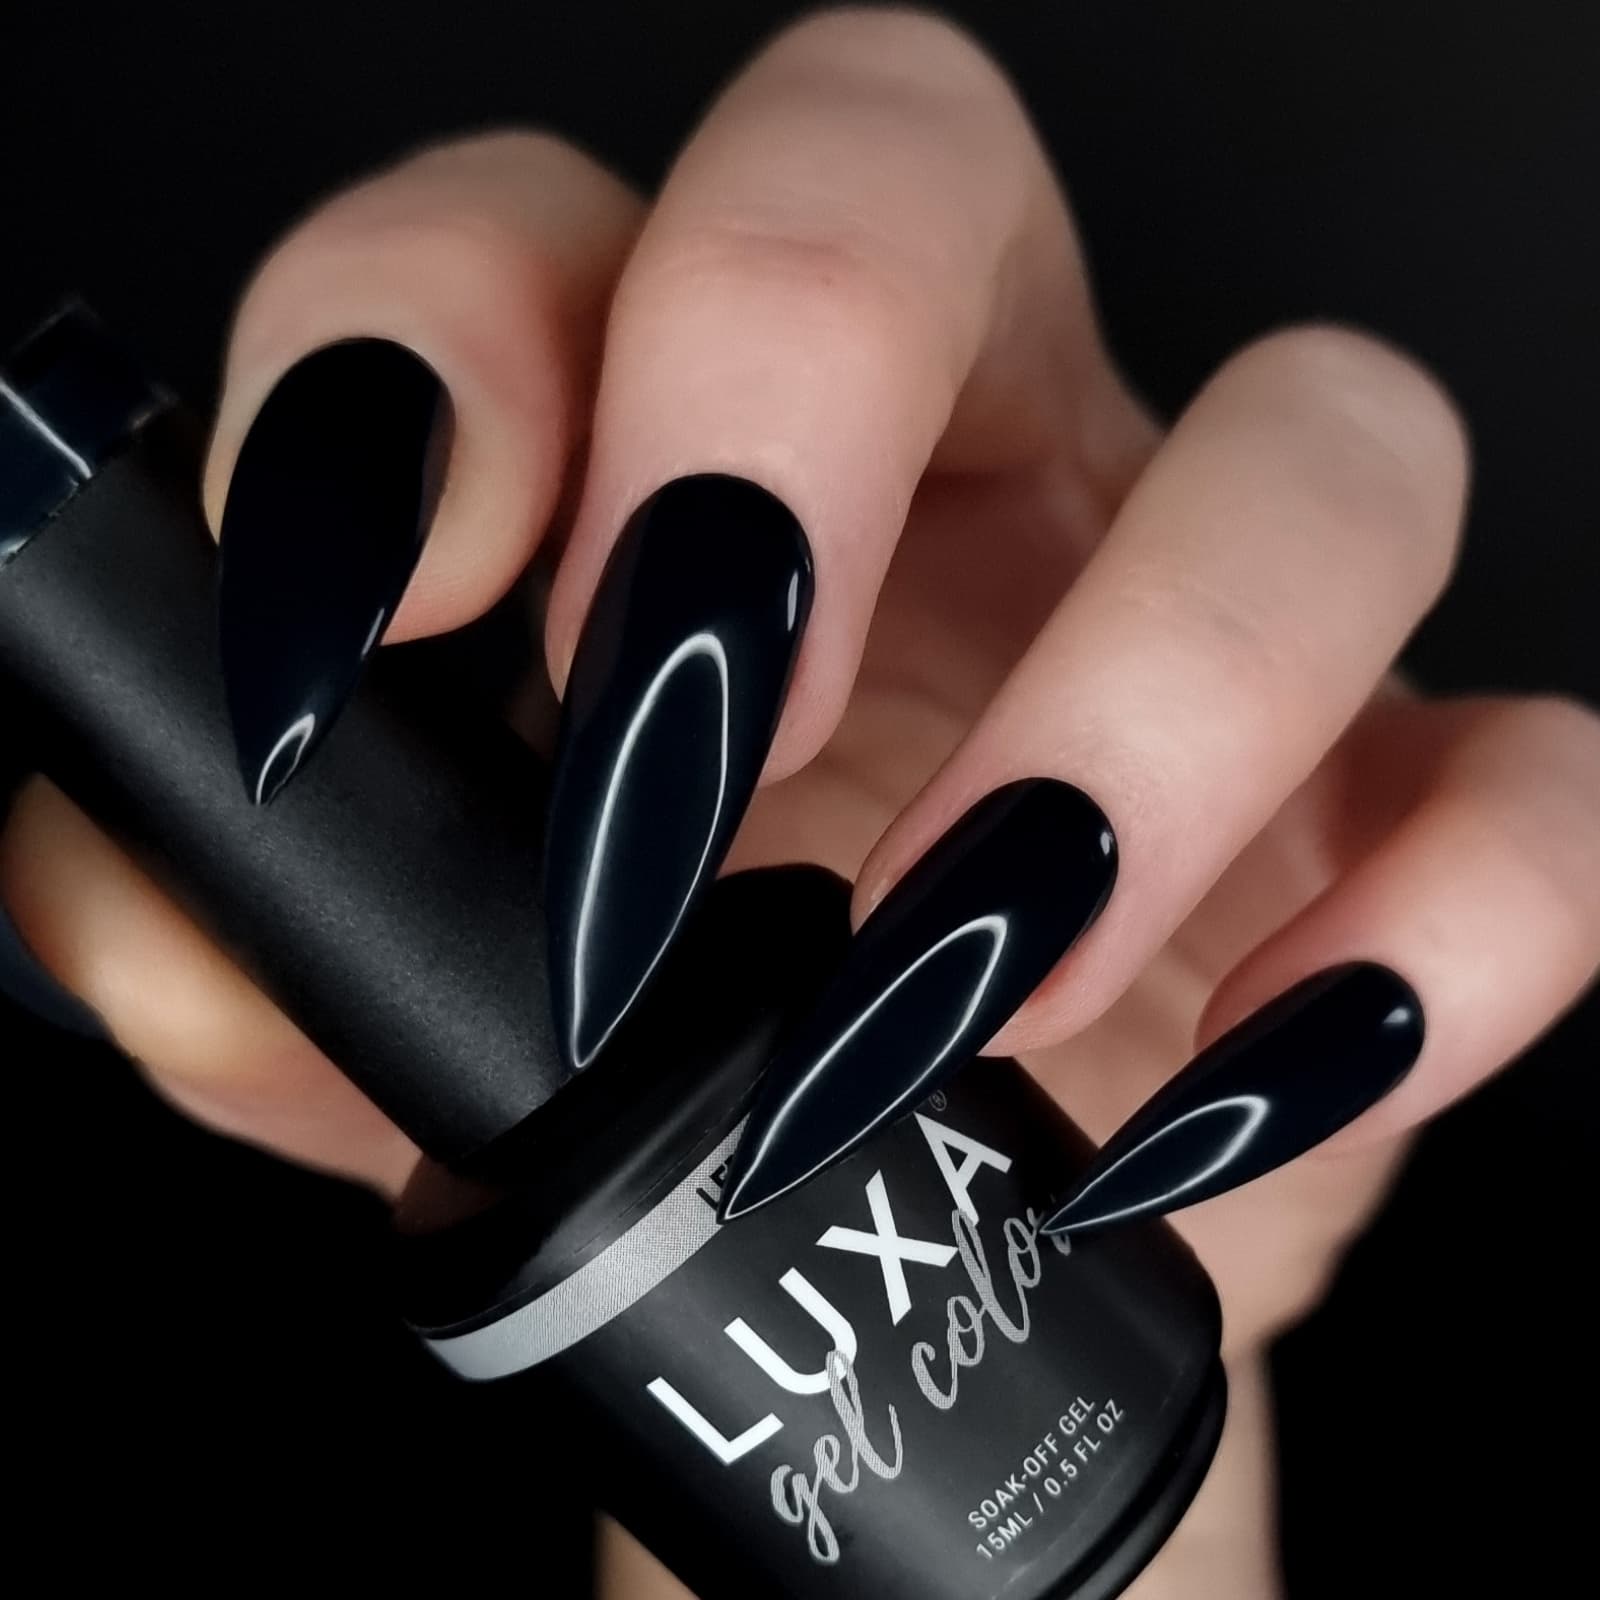 Luxapolish Rockin' Roccan Collection - 8pcs with free painted swatch sticks